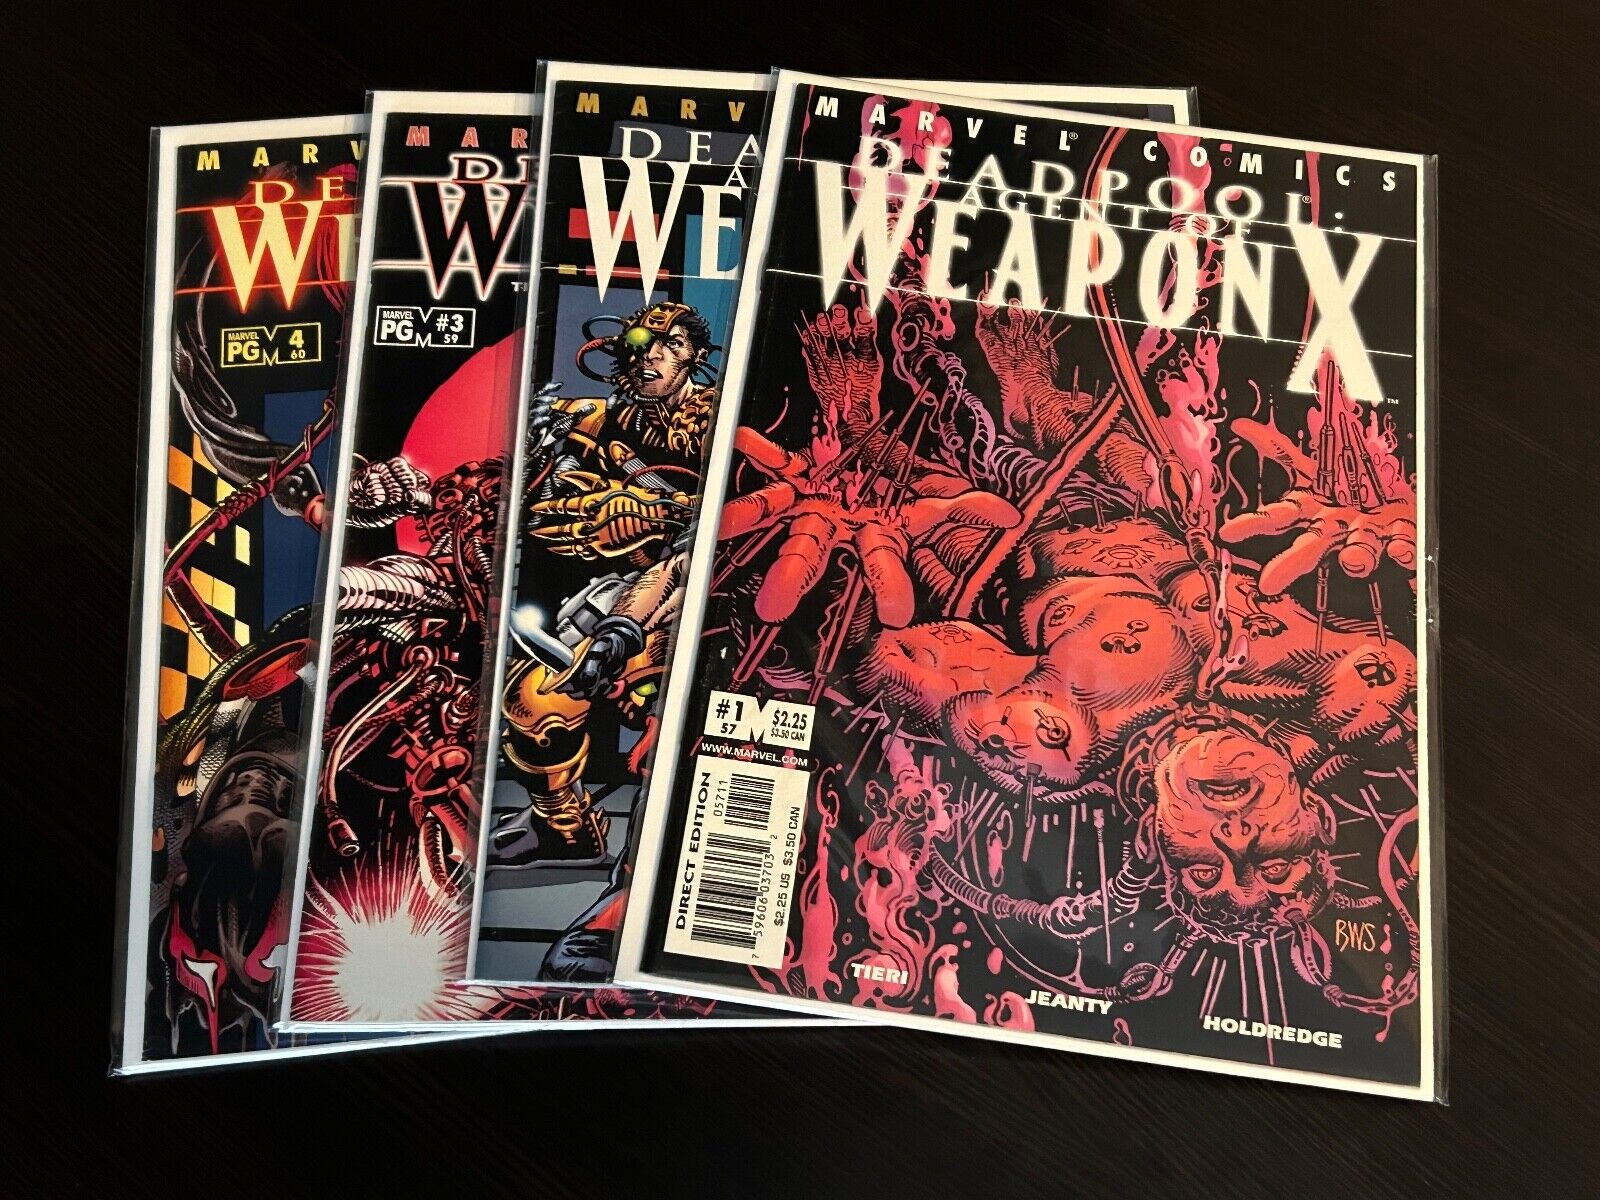 Deadpool #57-60 (1997) Agent of Weapon X #1-4